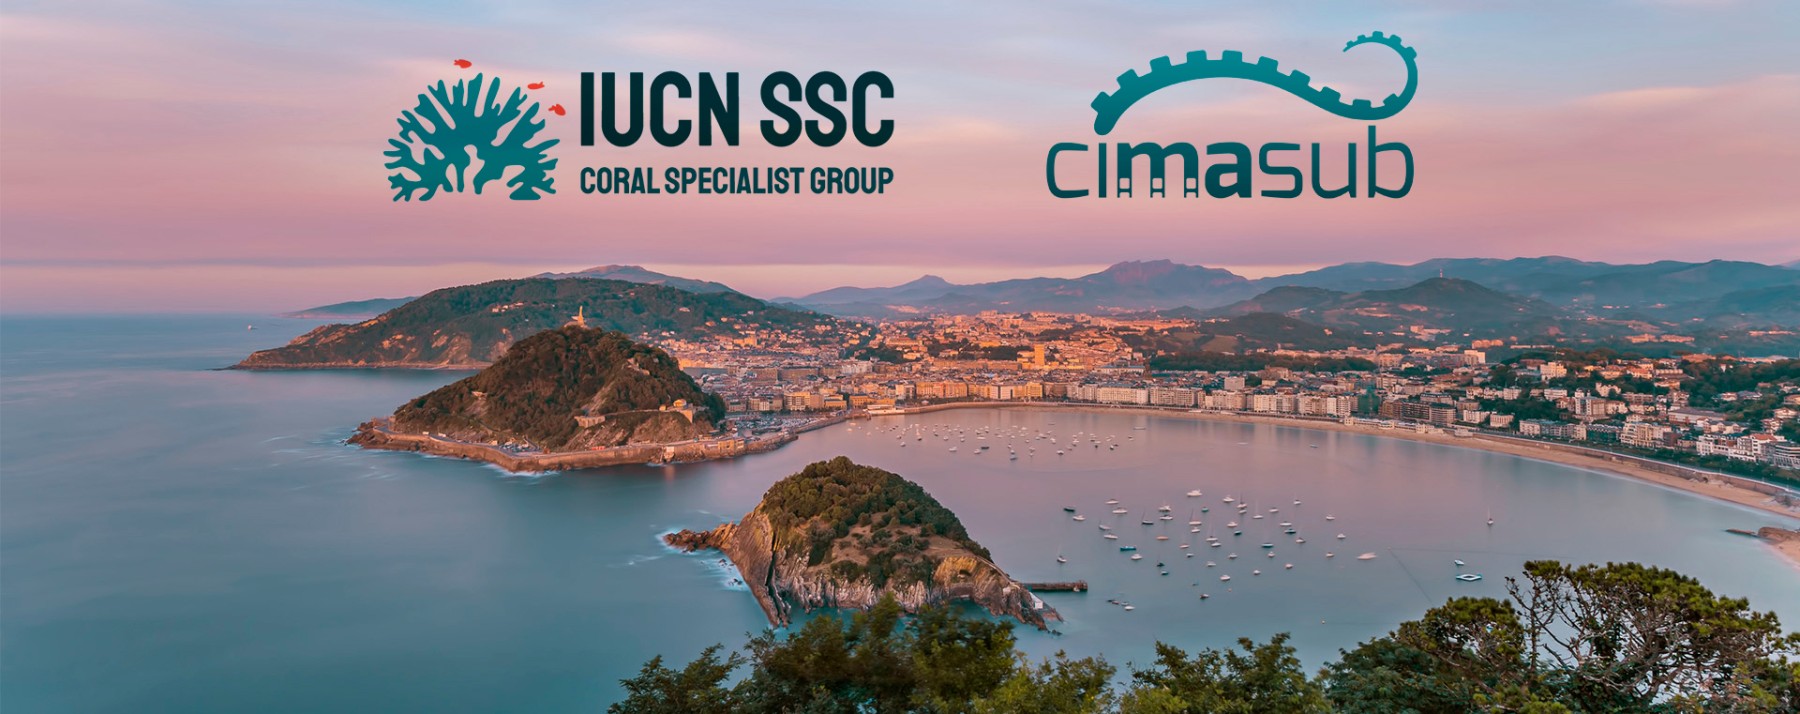 CIMASUB and IUCN SSC Coral Specialist Group partner to boost coral conservation